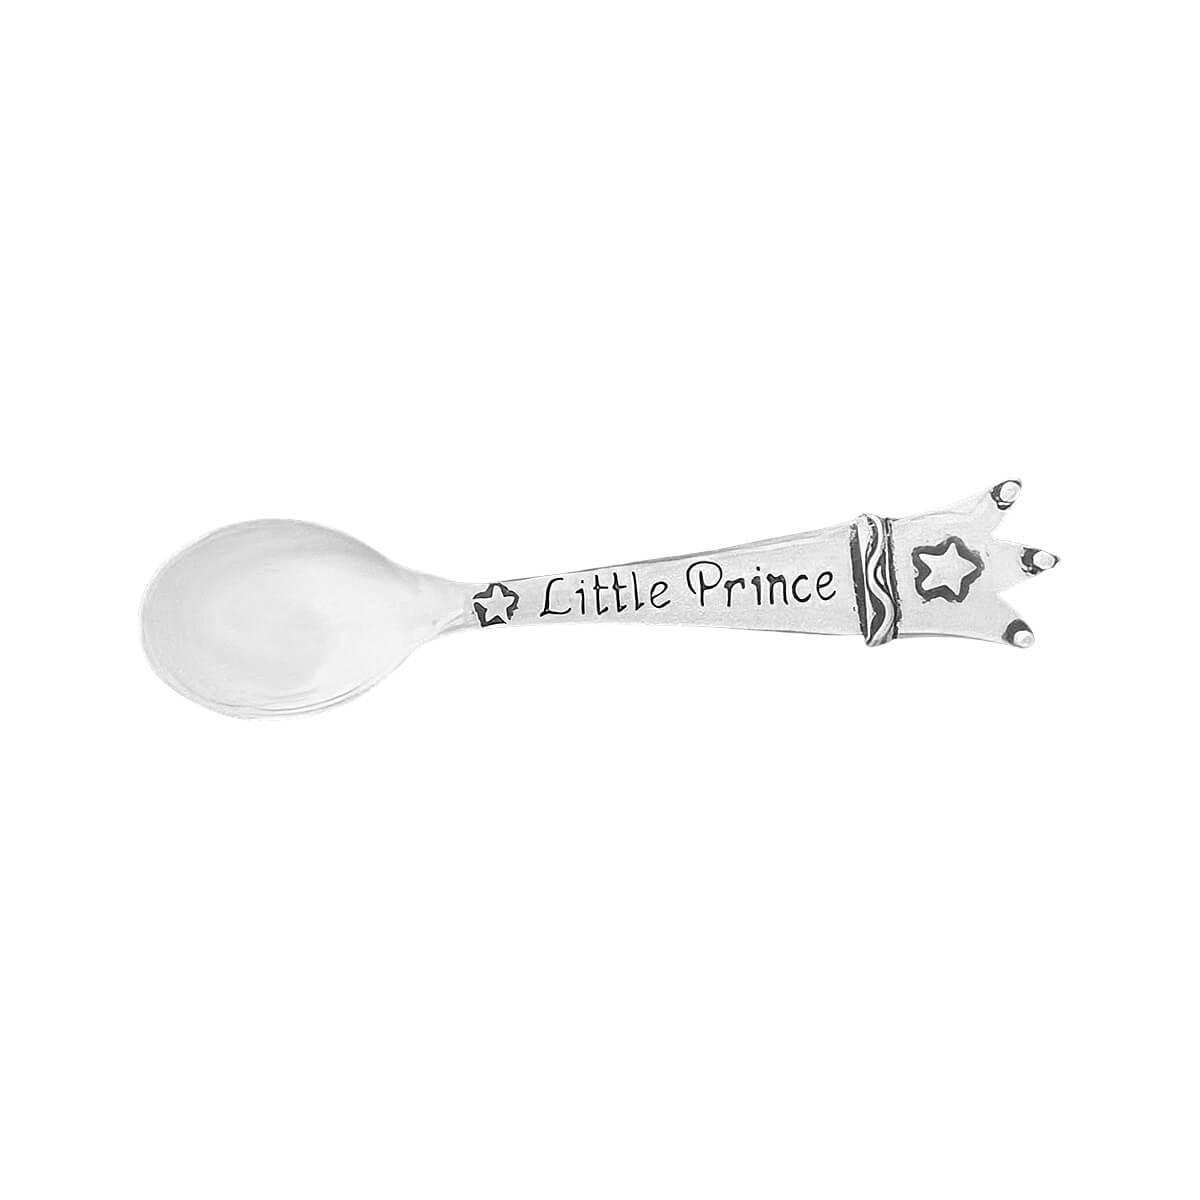  Little Prince Pewter Baby Spoon